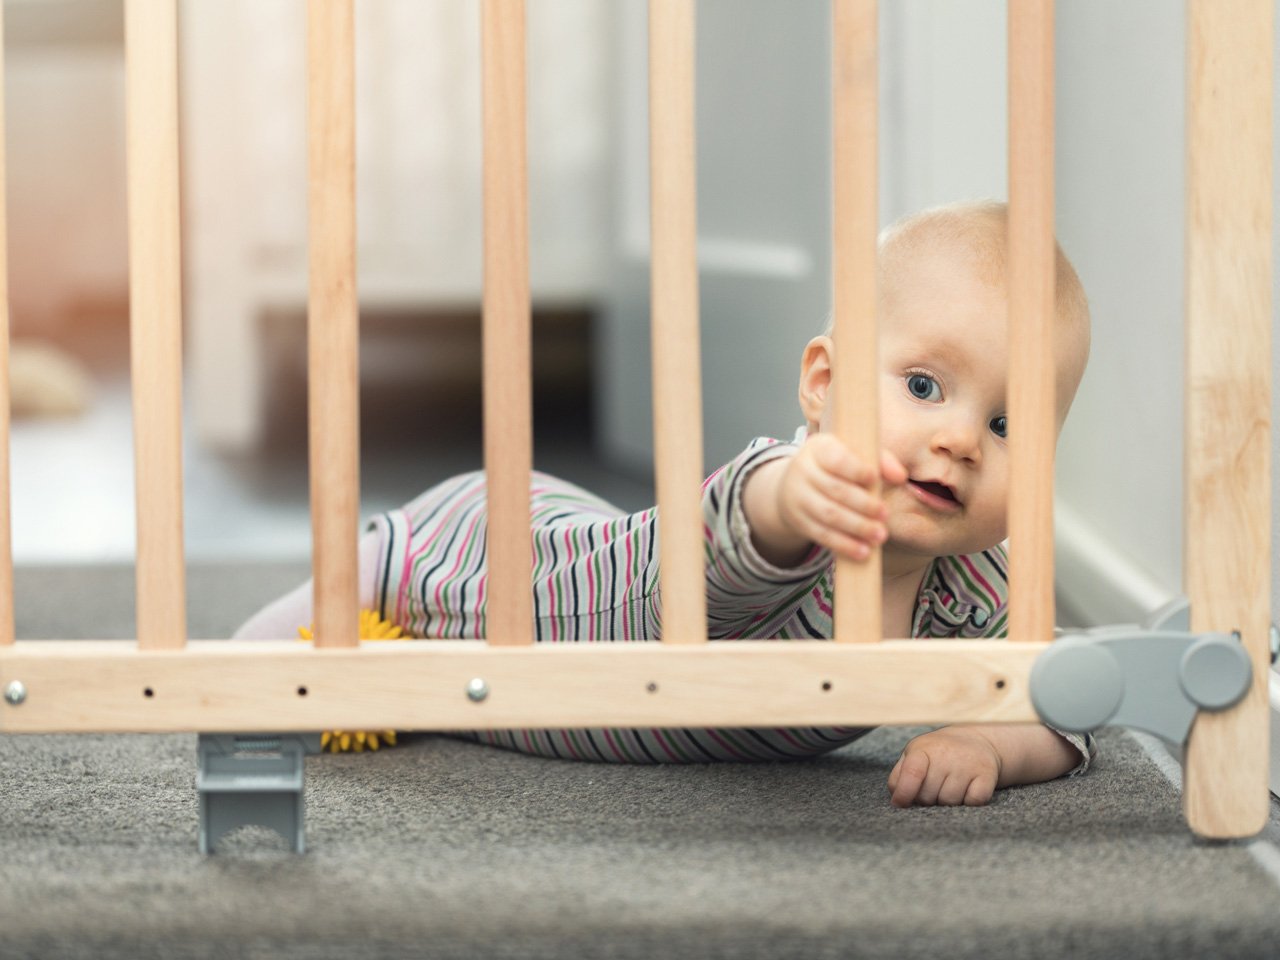 How Tall Should a Baby Gate Be 